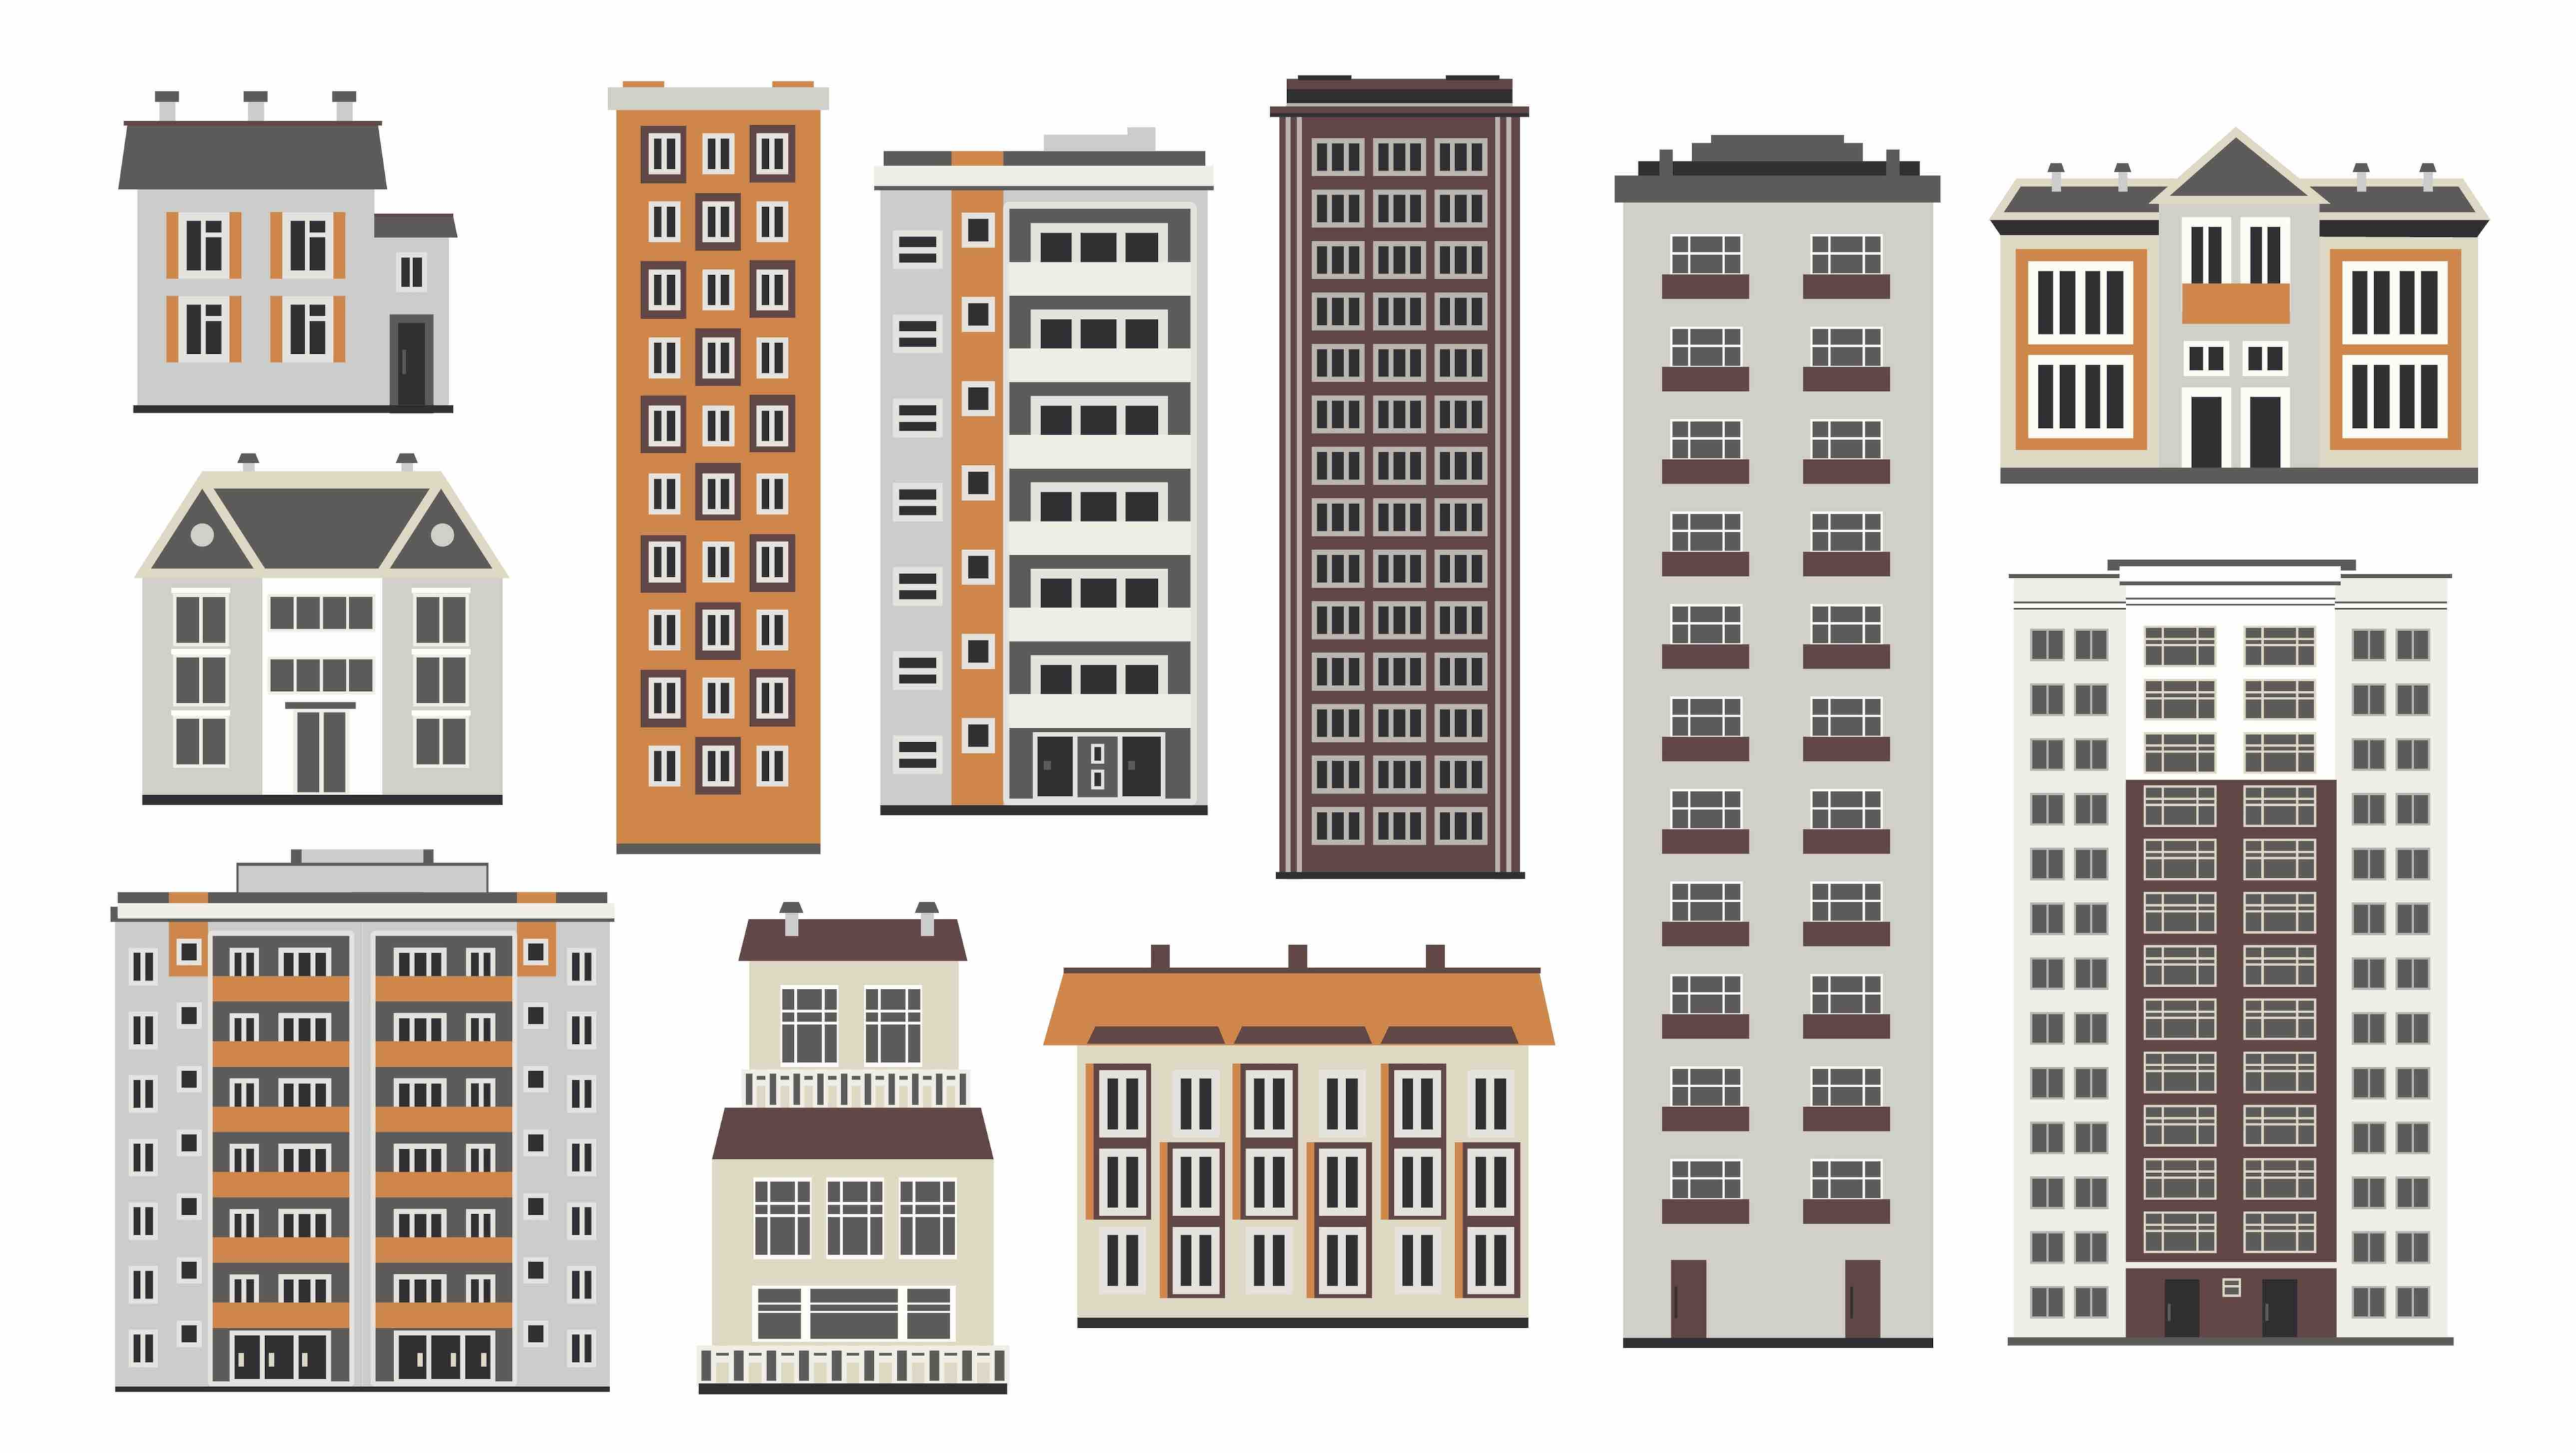 A visual representation of different midrise apartments types, showcasing their unique architectural designs and features.